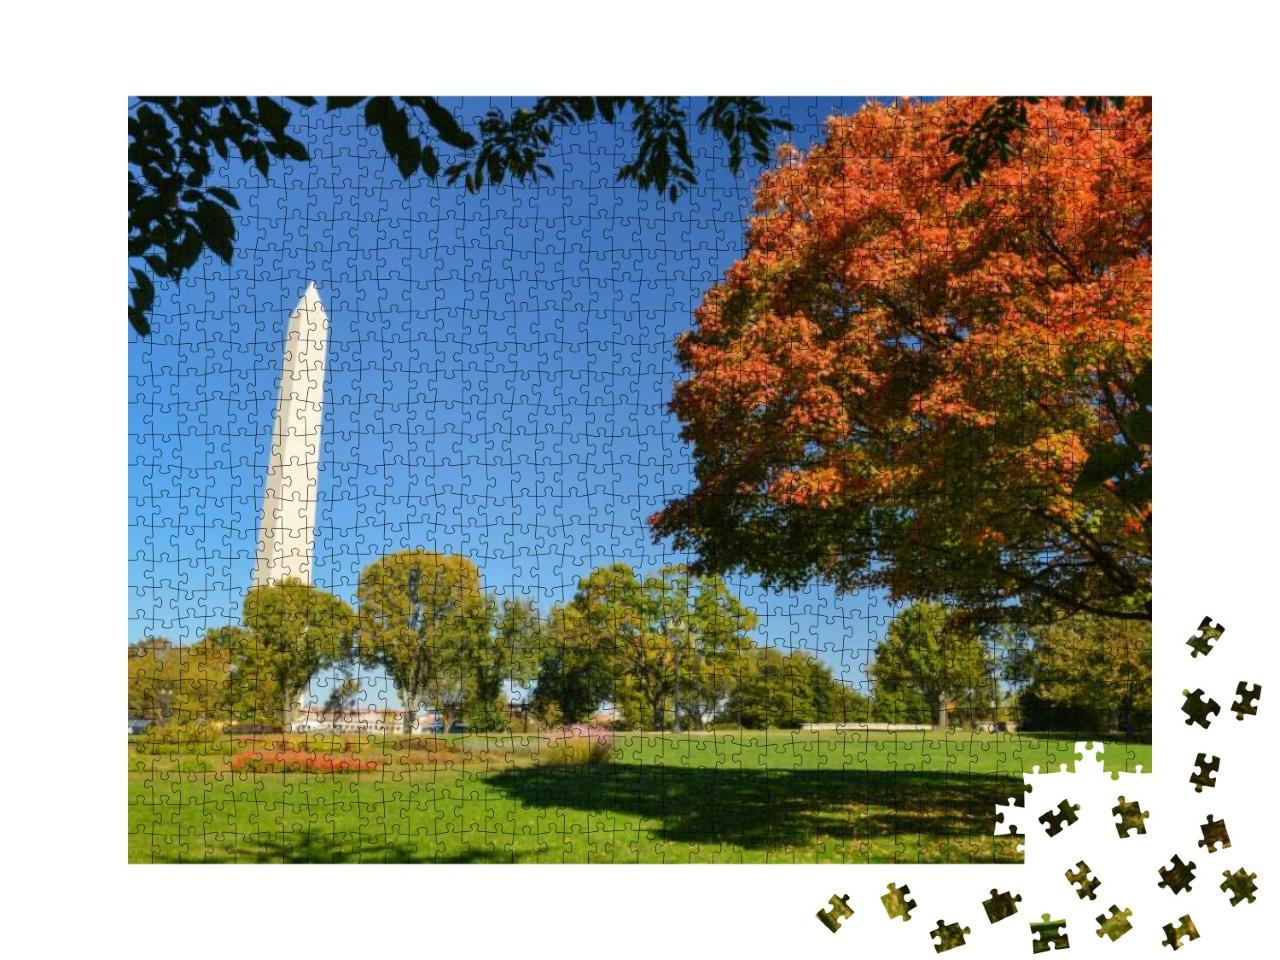 Washington Dc in Autumn - Washington Monument as Seen fro... Jigsaw Puzzle with 1000 pieces